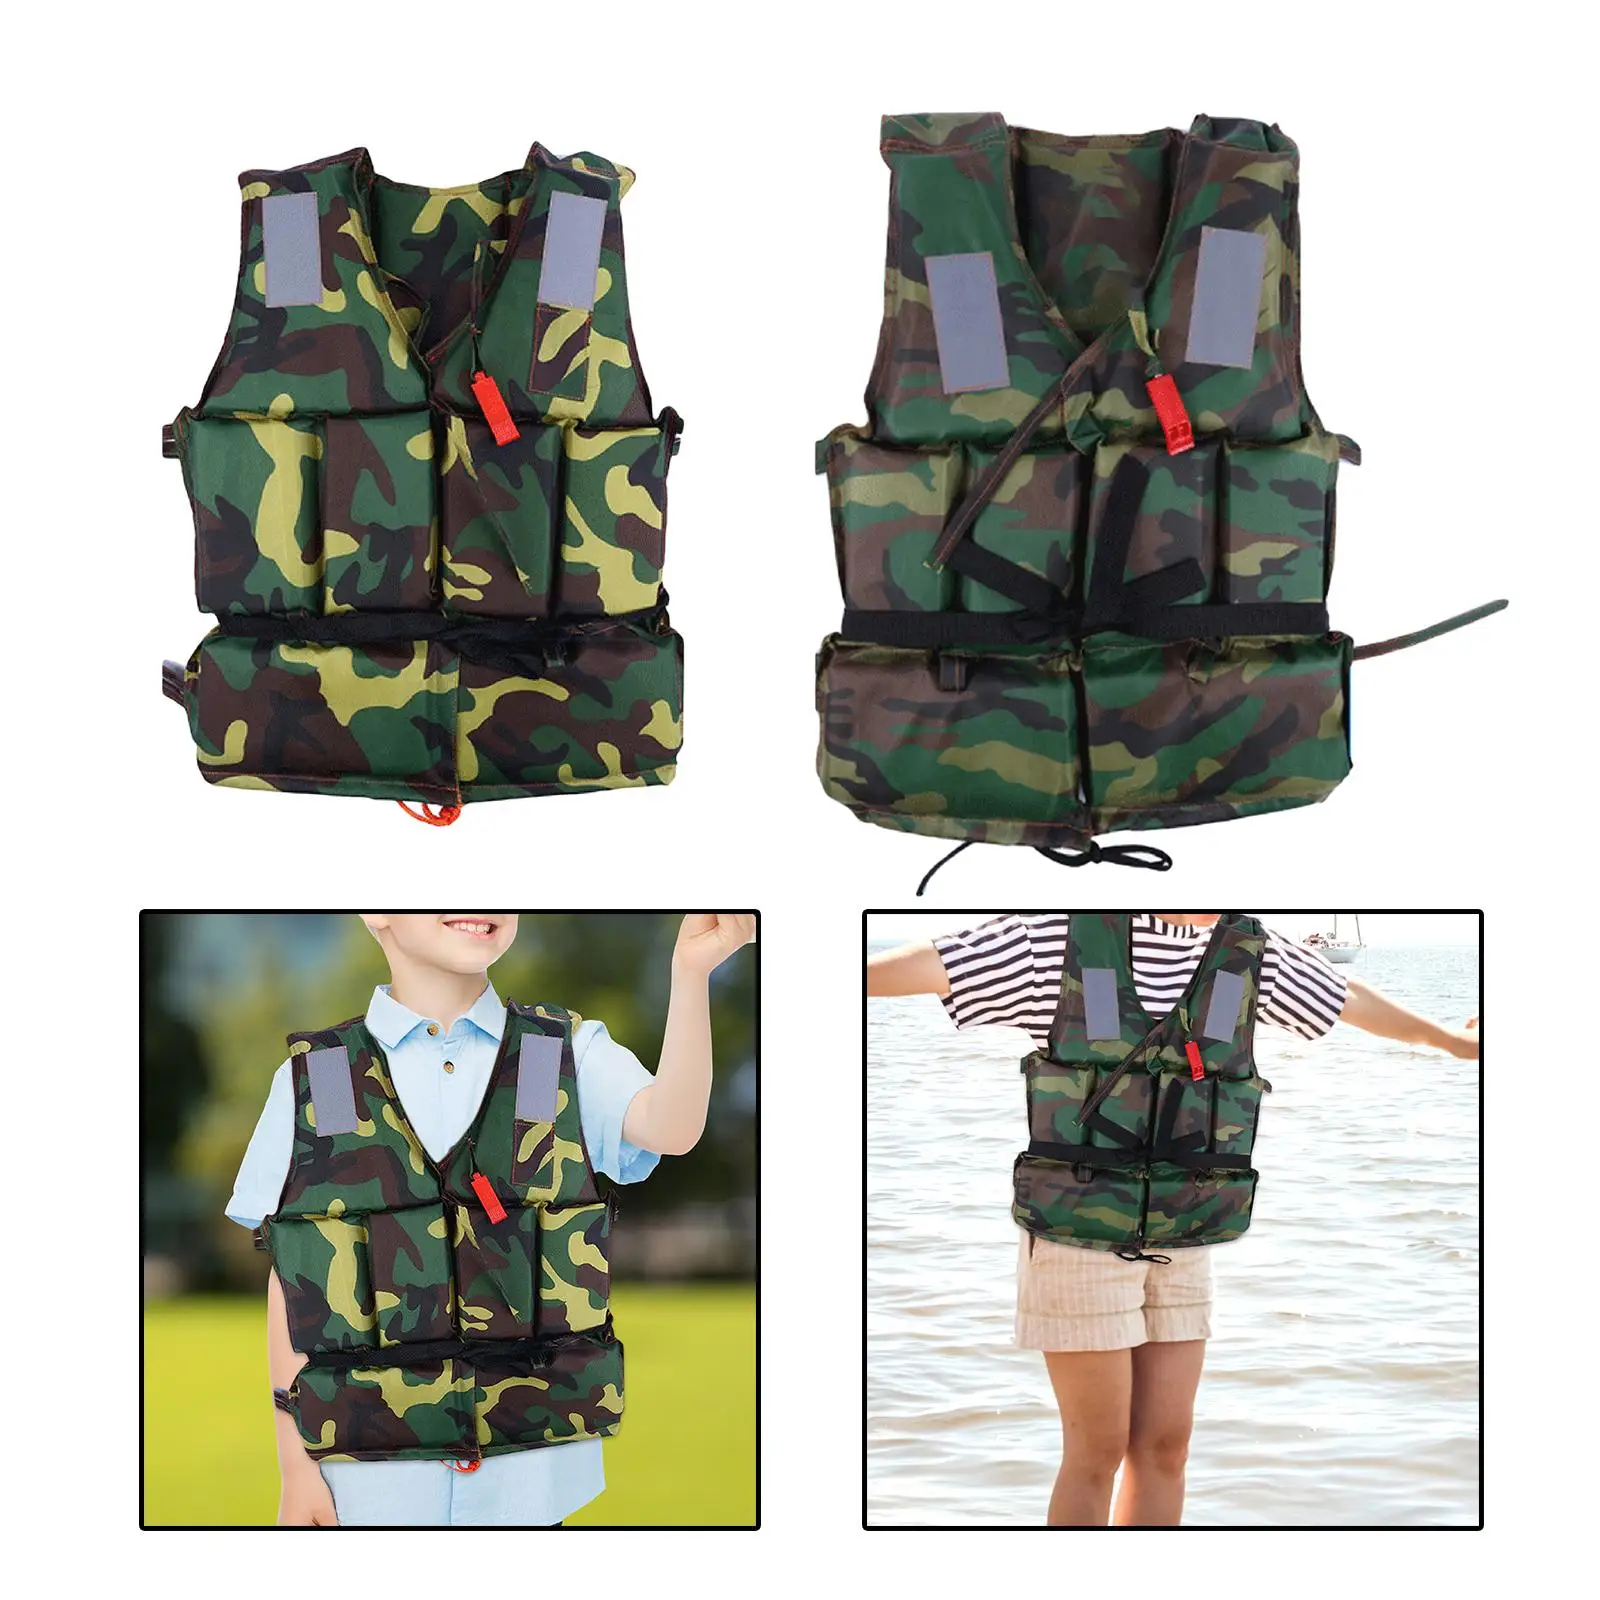 Drifting Life Jacket Swimming Life Jacket Vest Reflective Adults Children Waistcoat for Diving Boating Canoeing Surfing Outdoor